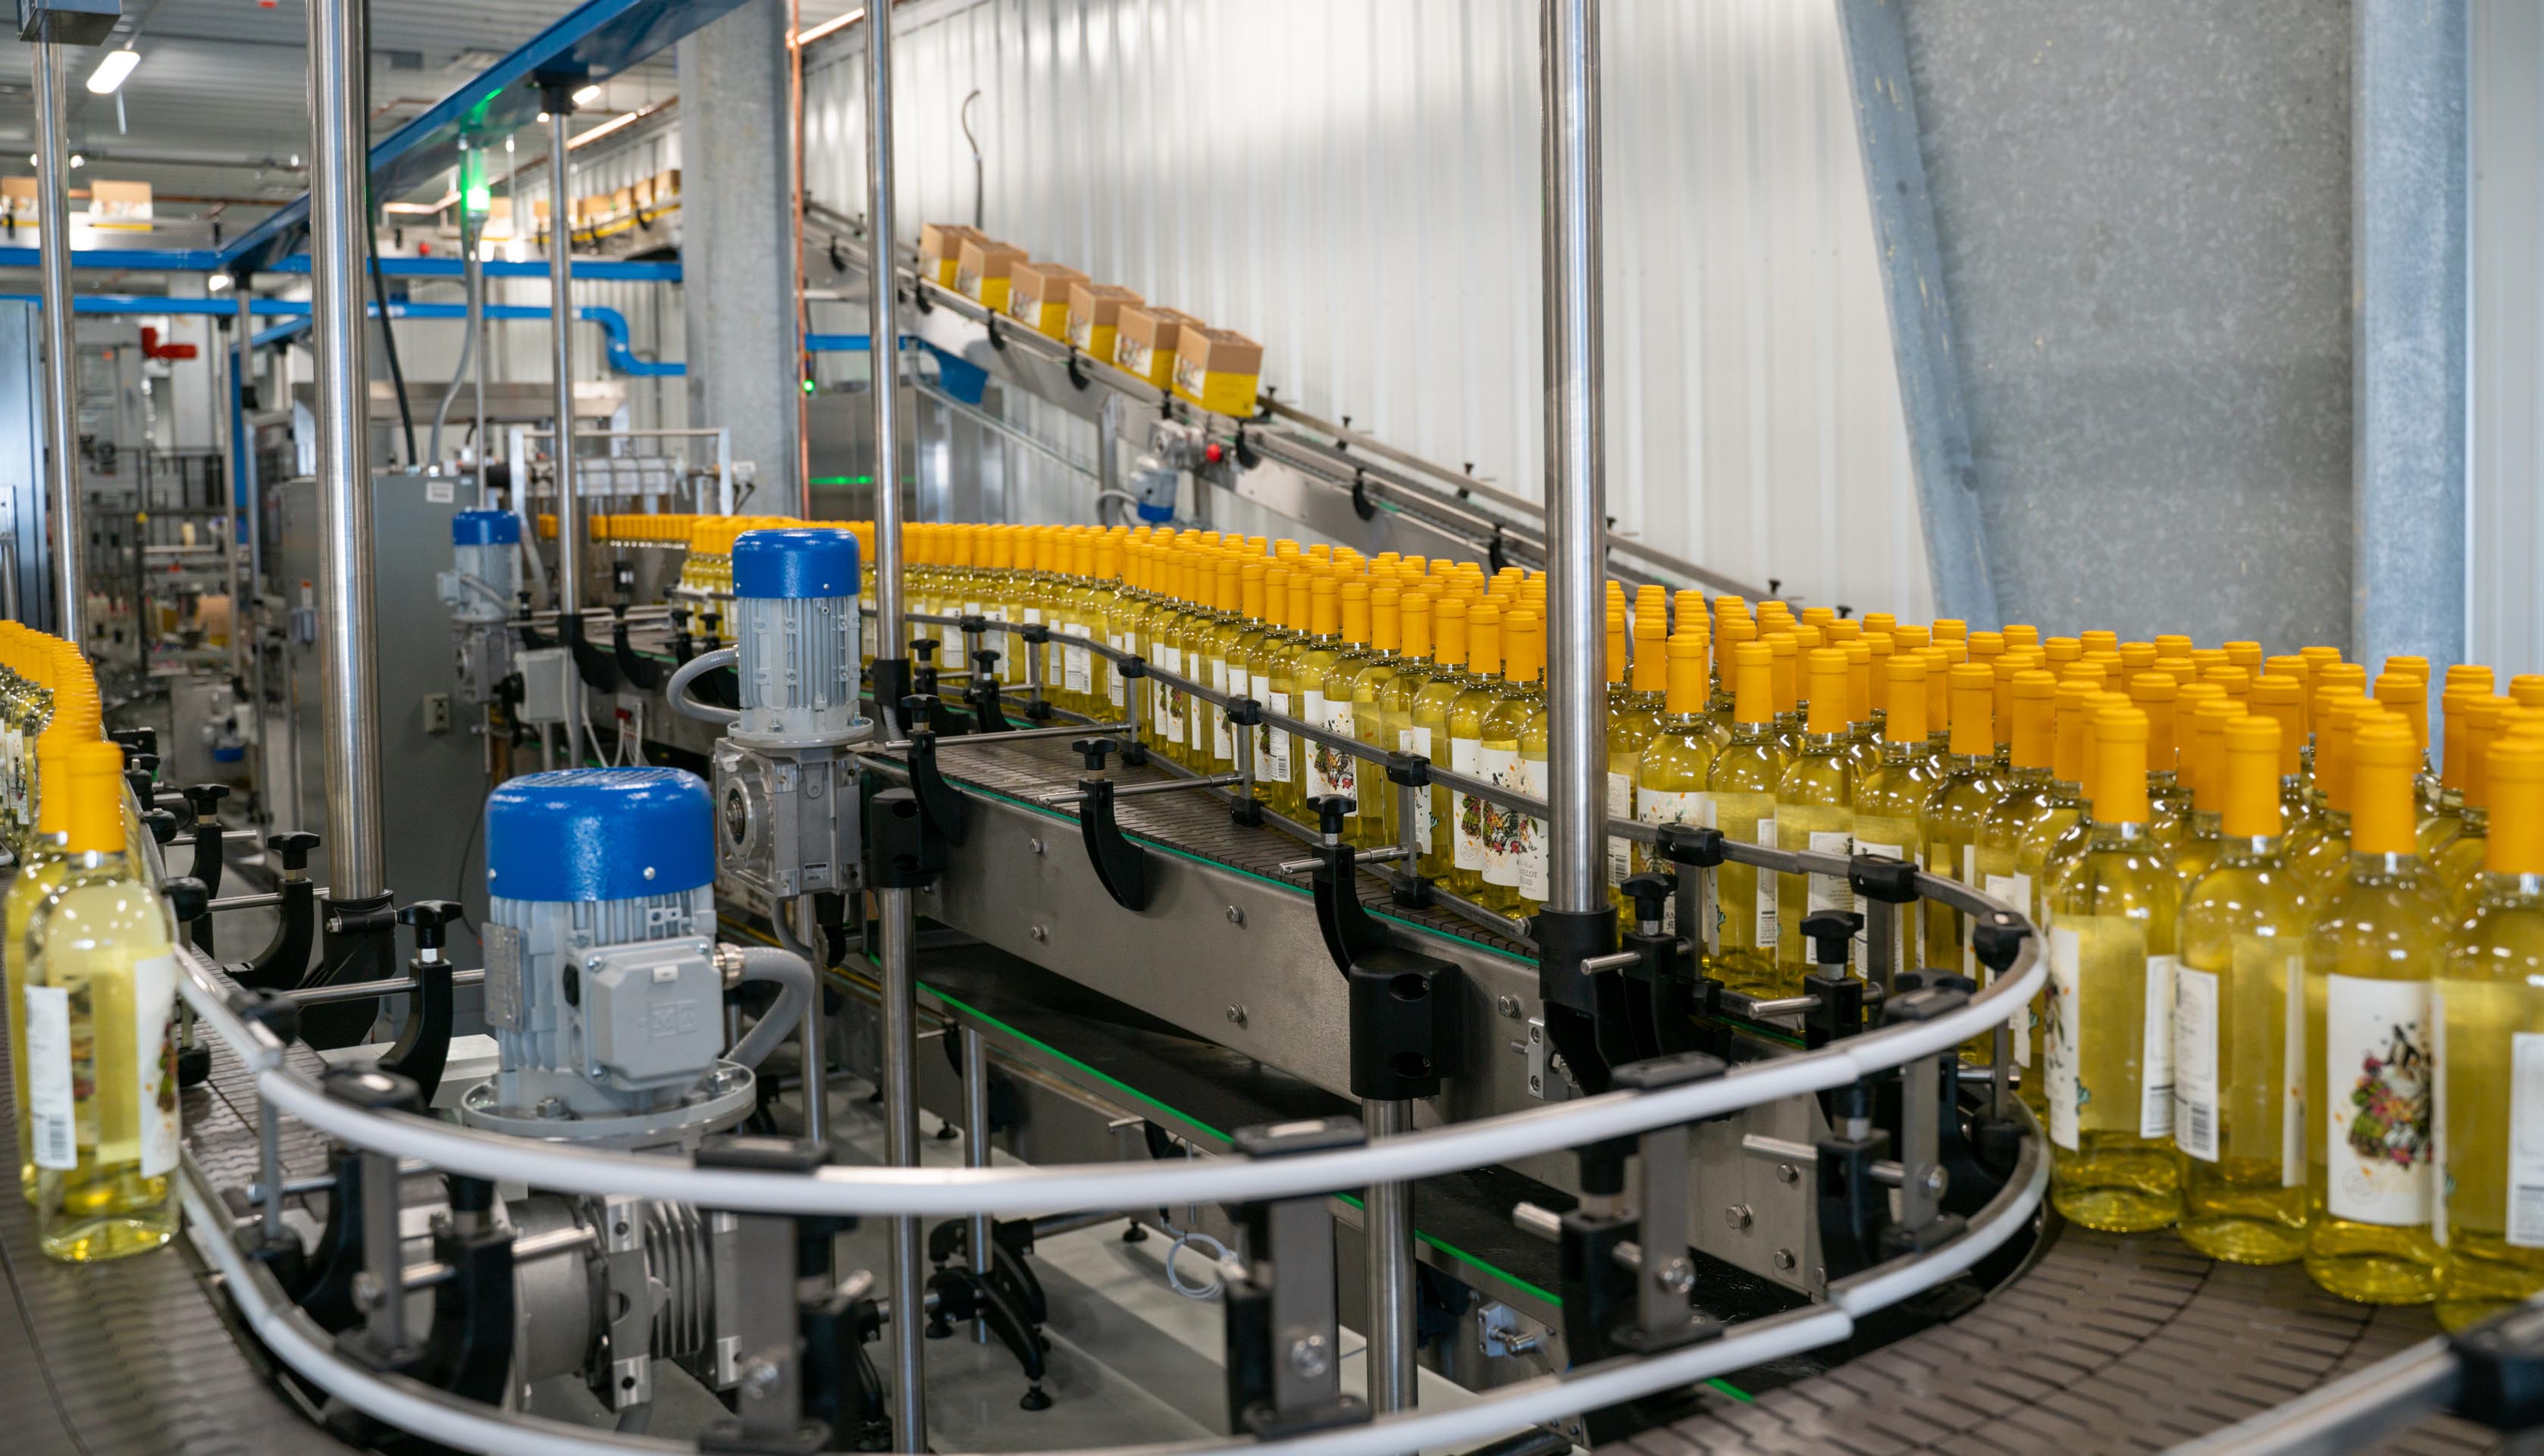 Oliver Winery's state-of-the-art bottling line